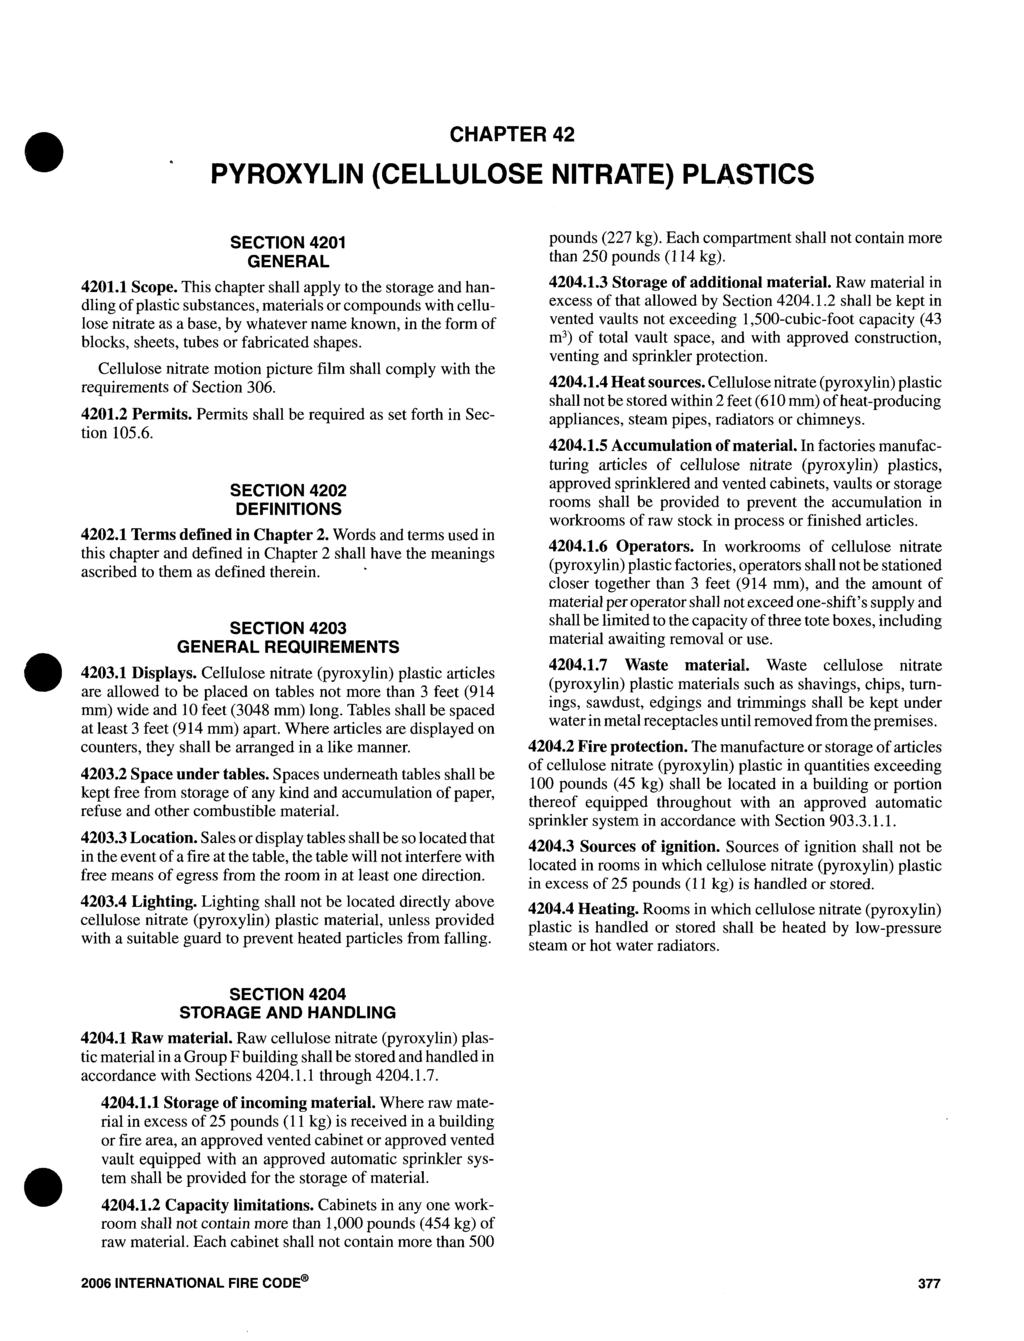 CHAPTER 42 PYROXYLIN {CELLULOSE NITRATE) PLASTICS SECTION 4201 GENERAL 4201.1 Scope.